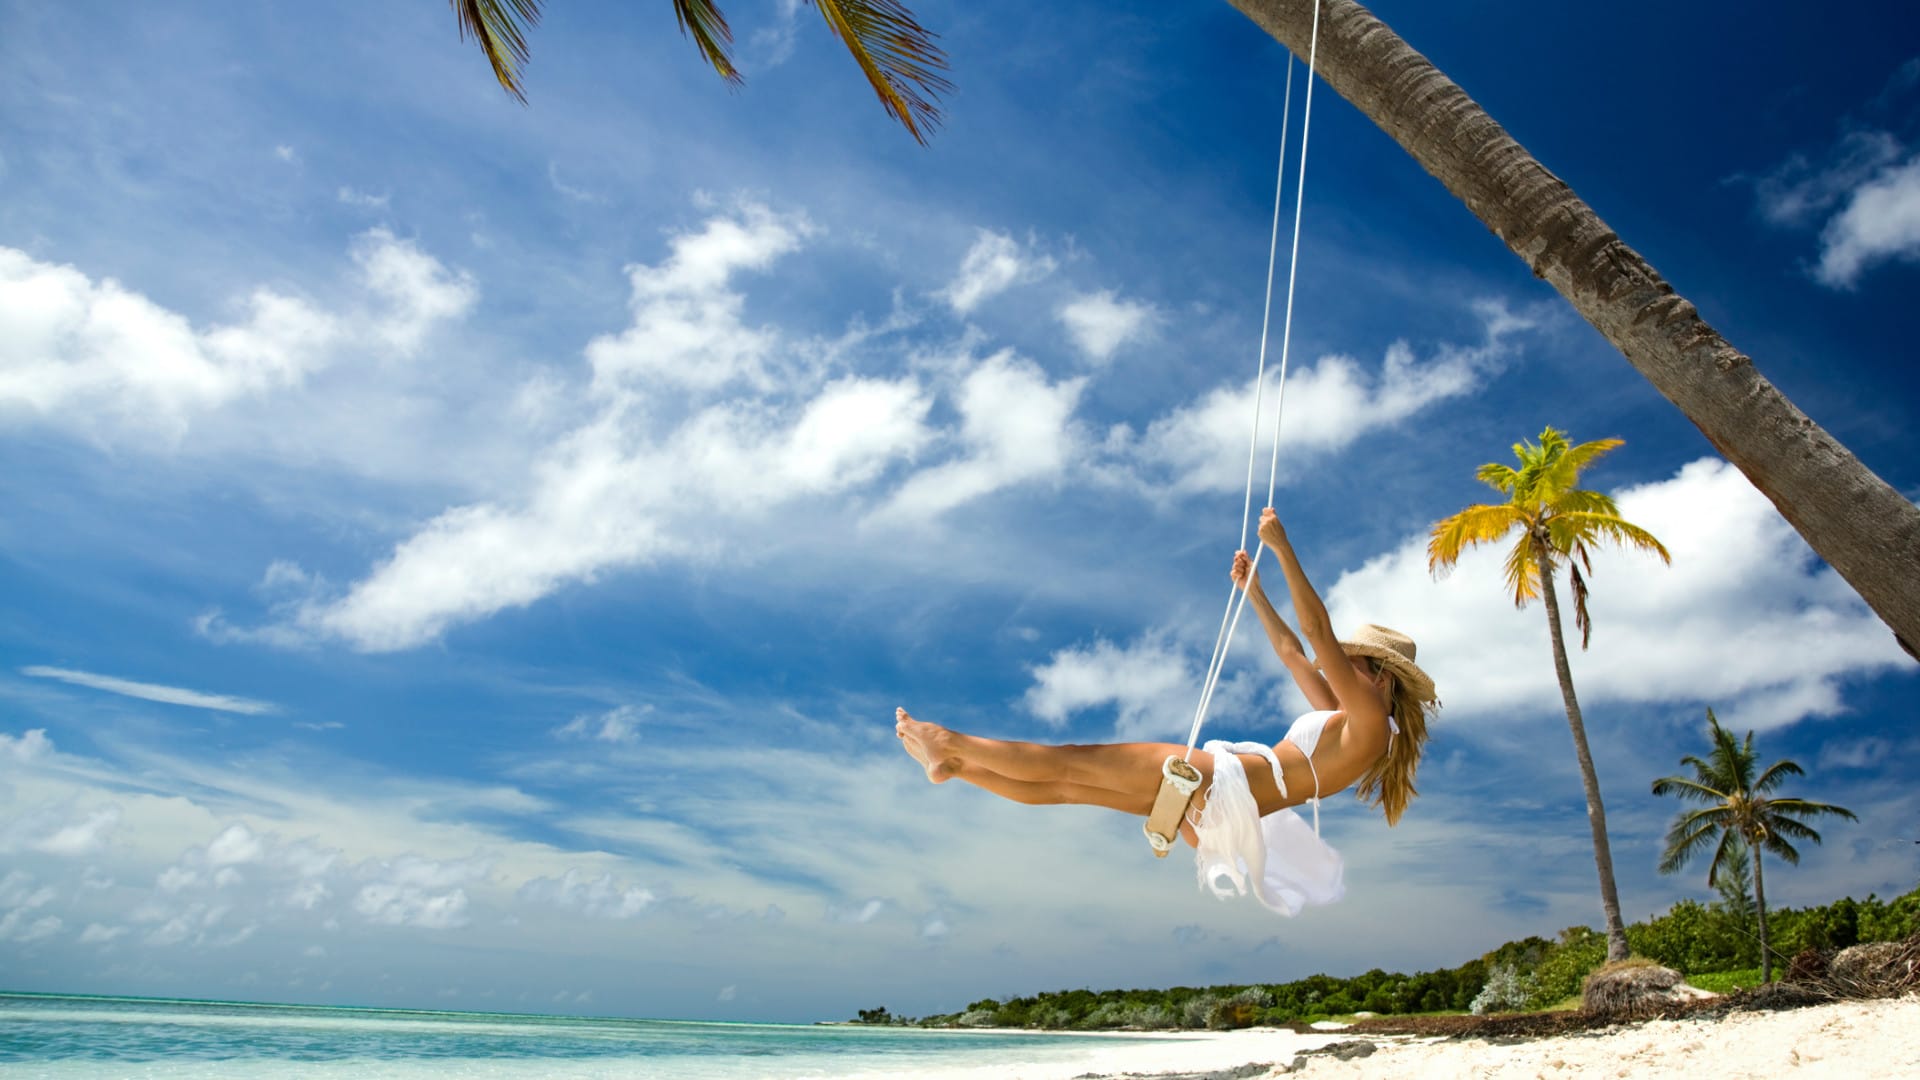 Image of woman using tree swing in the bahamas